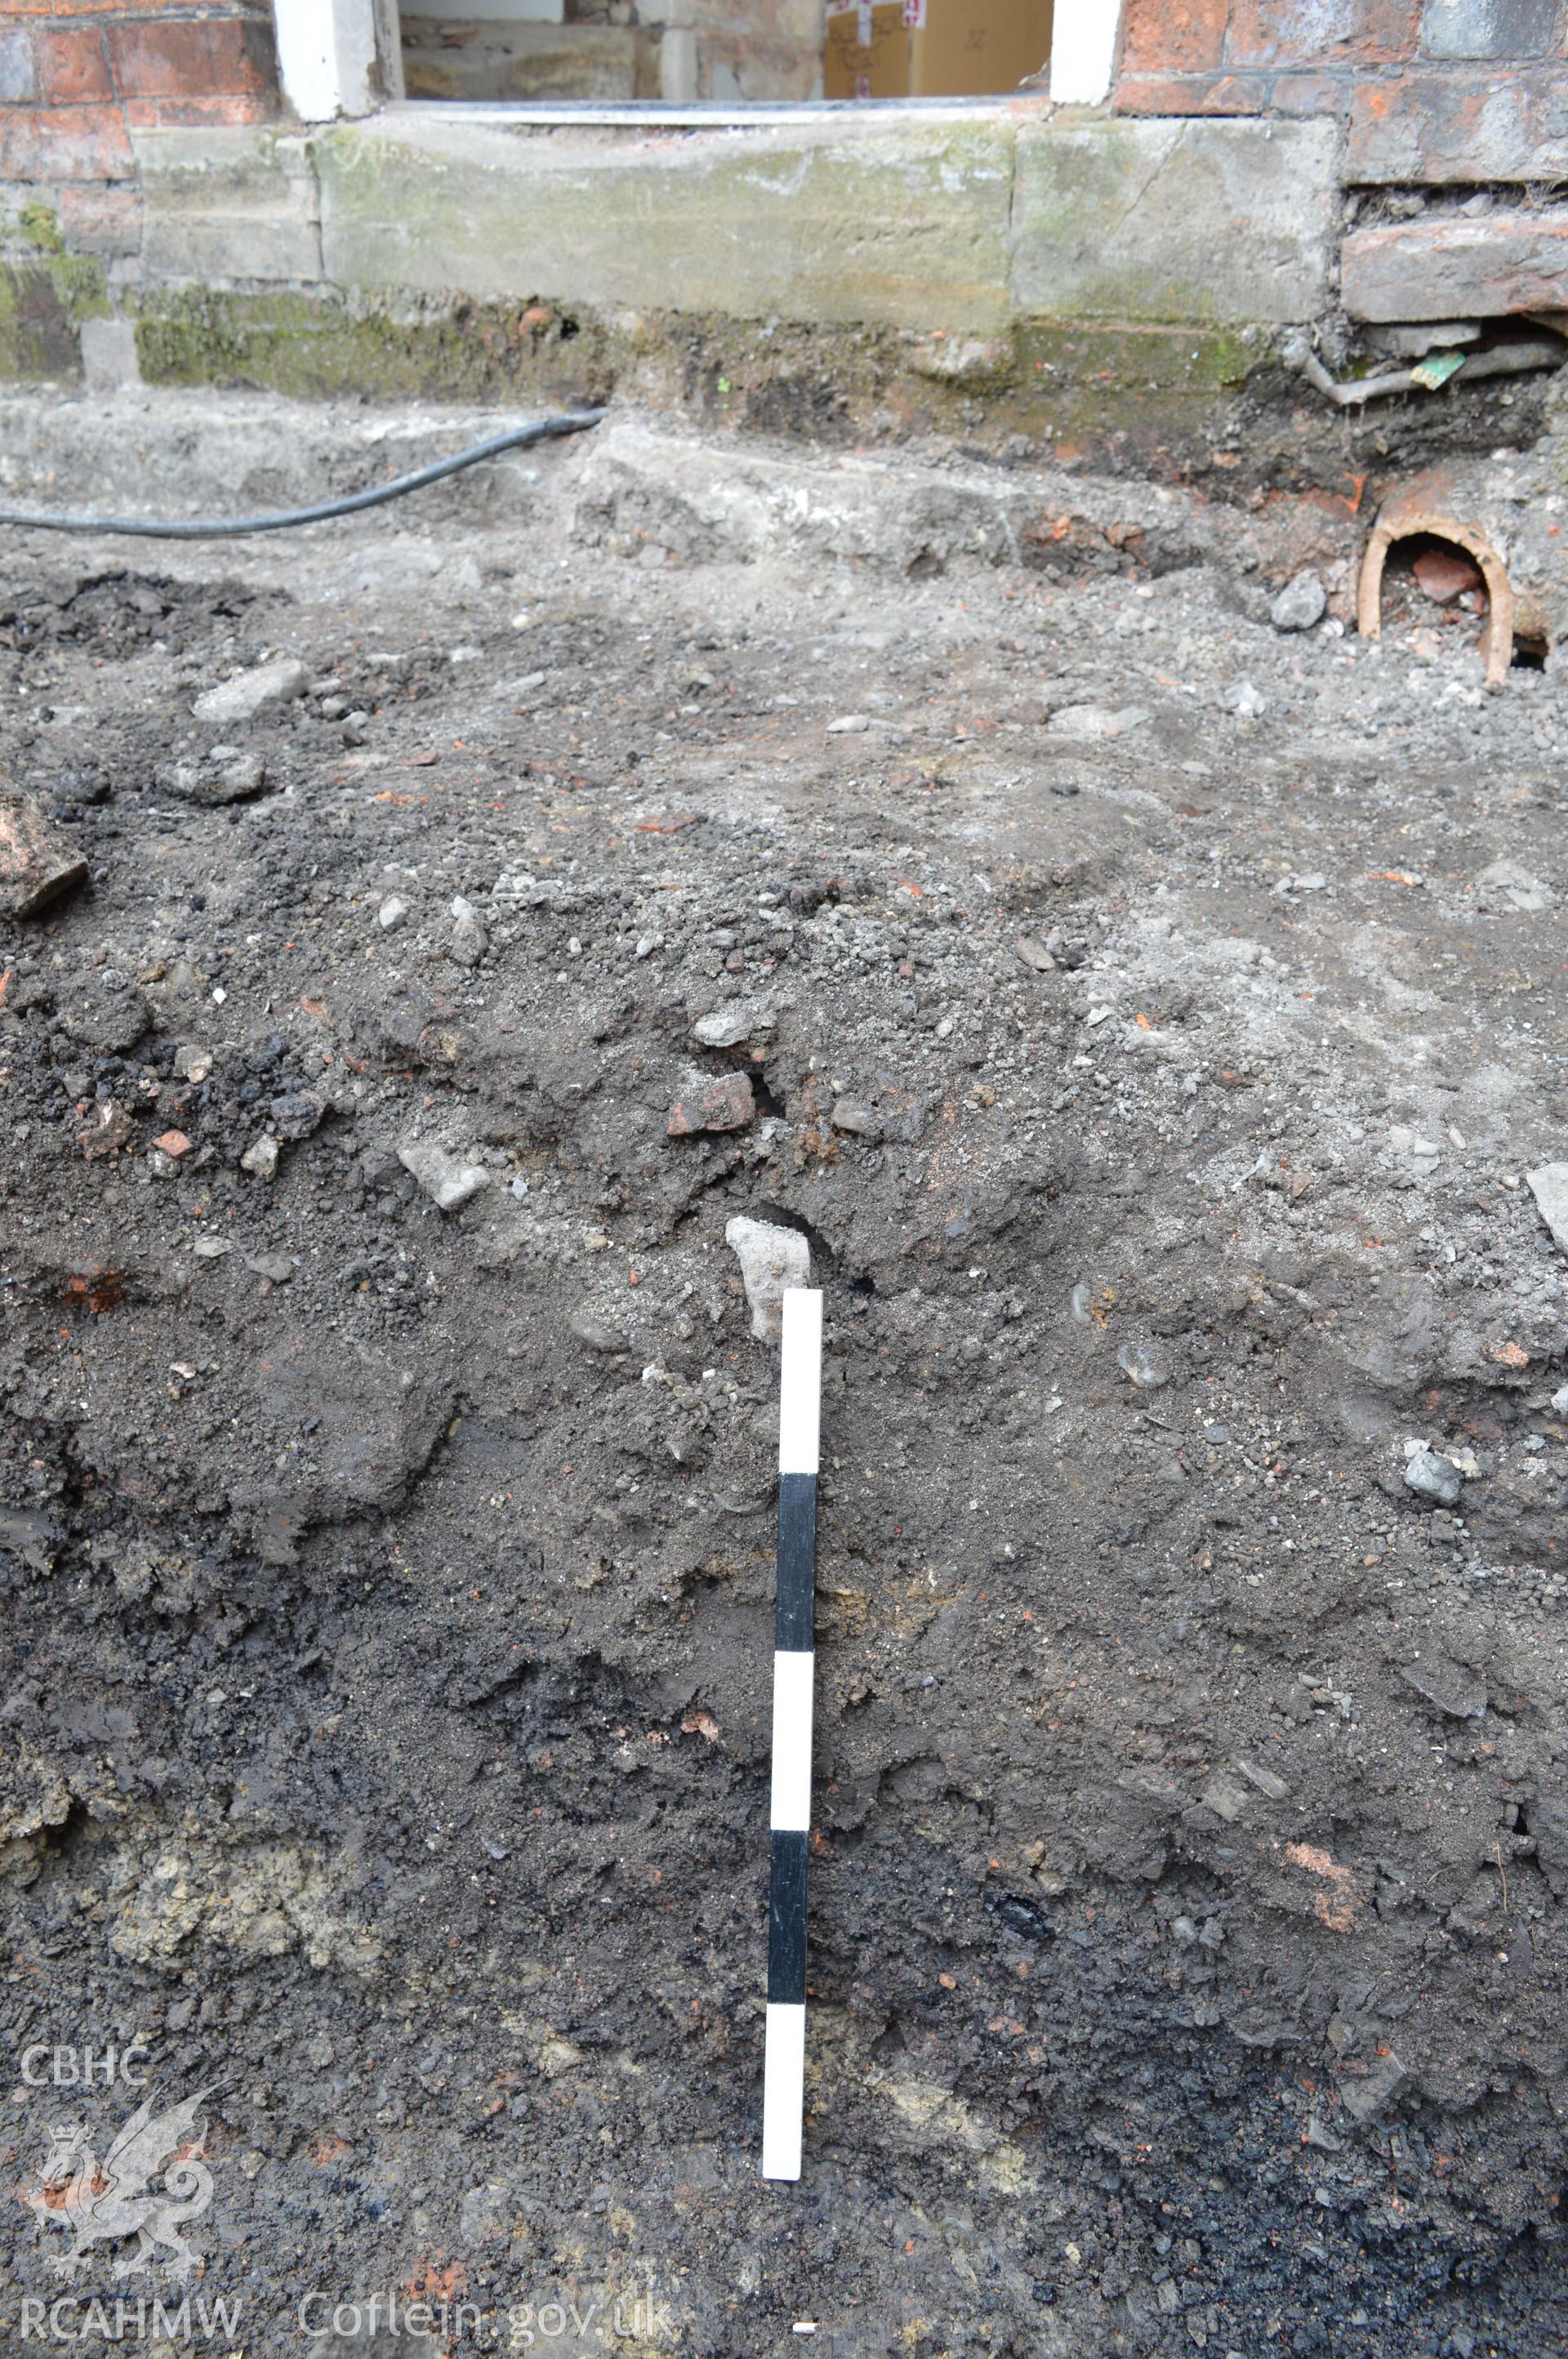 Digital colour photograph showing view from the north sshowing deposits within draining trench. Photographed as part of CPAT Project 2351: 2 Severn Street, Welshpool, Powys - Archaeological Watching Brief, 2019. Report no. 1663.